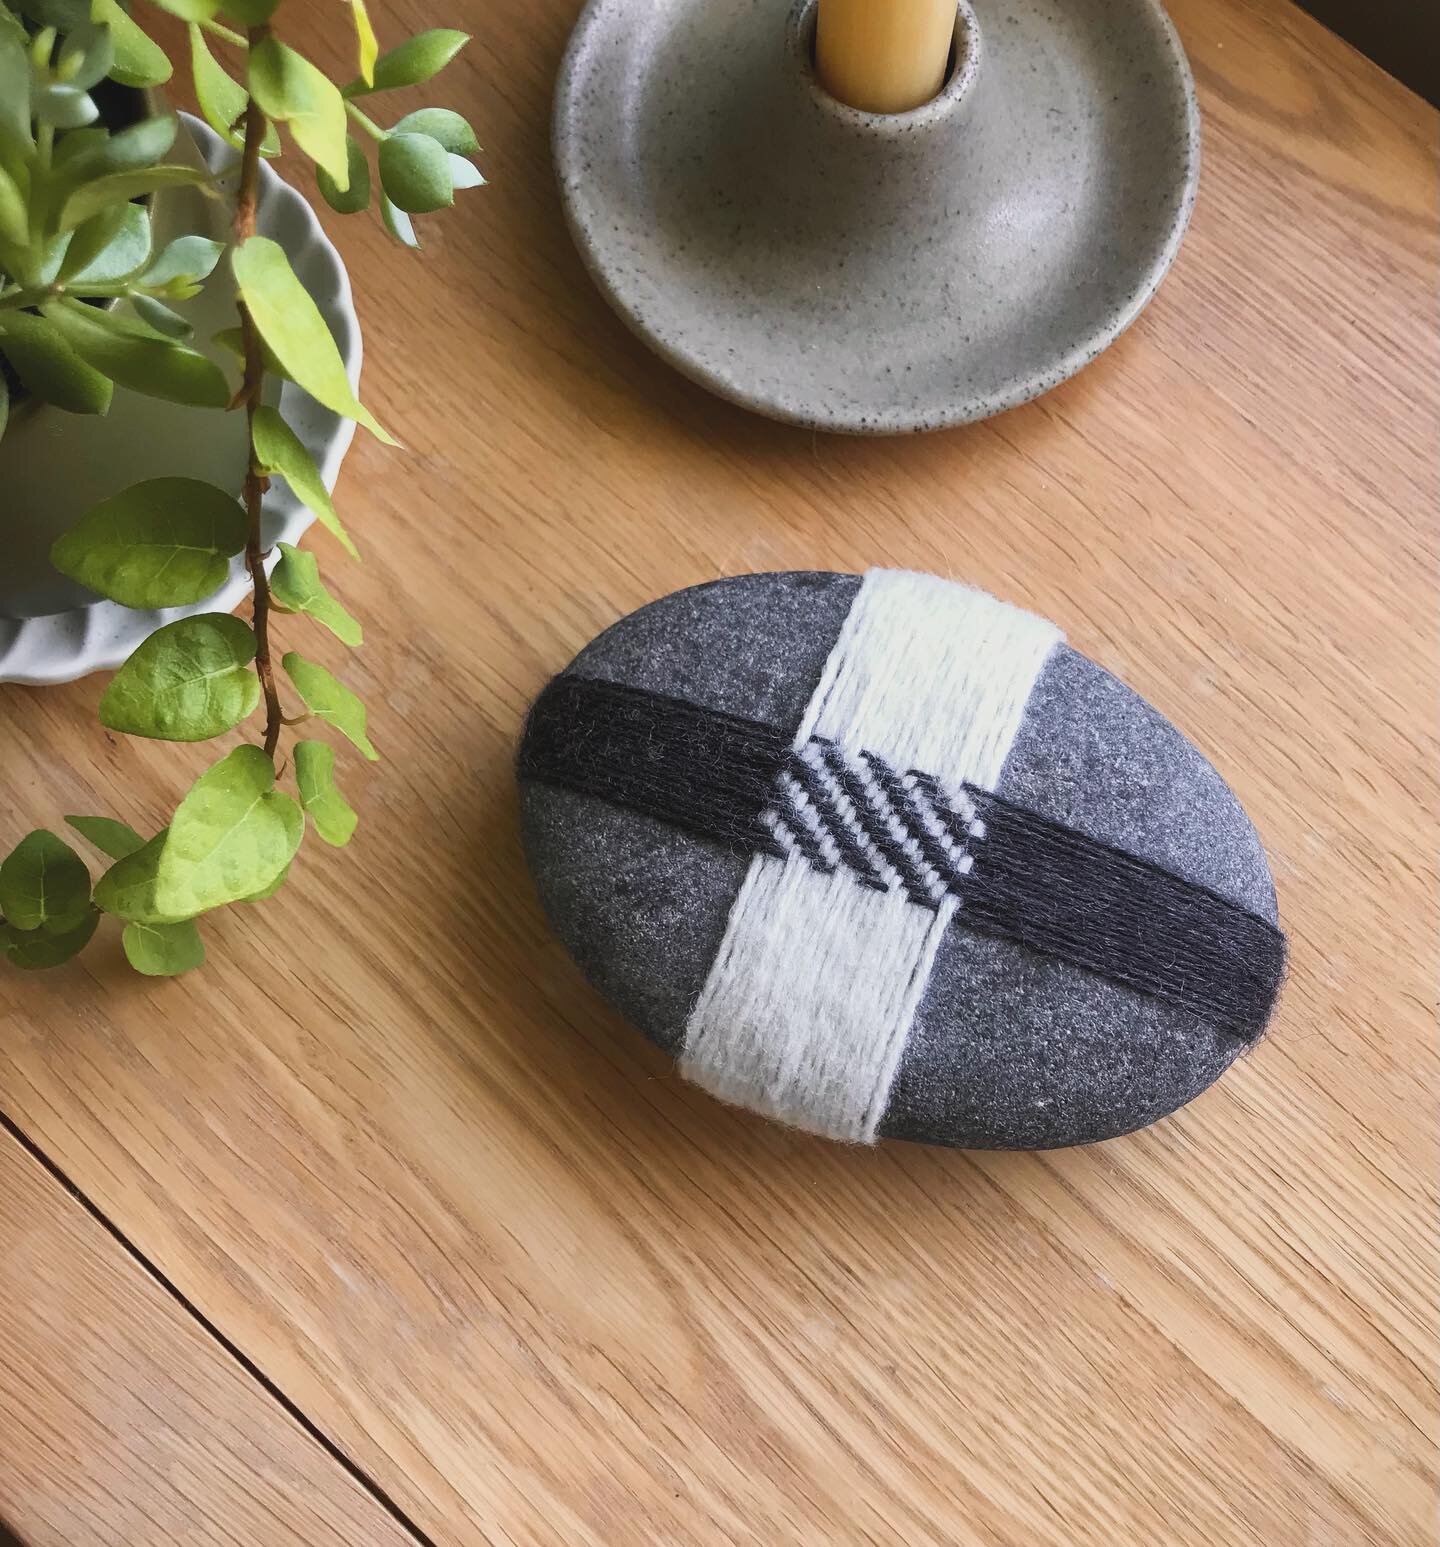 My son has given me a cold so to keep my hands busy while I rested, I thought I&rsquo;d give rock weaving a go. It was fun! I was making it up as I went along, so the underneath of the stone is a hot mess (which is okay) 😀 This was inspired by the b